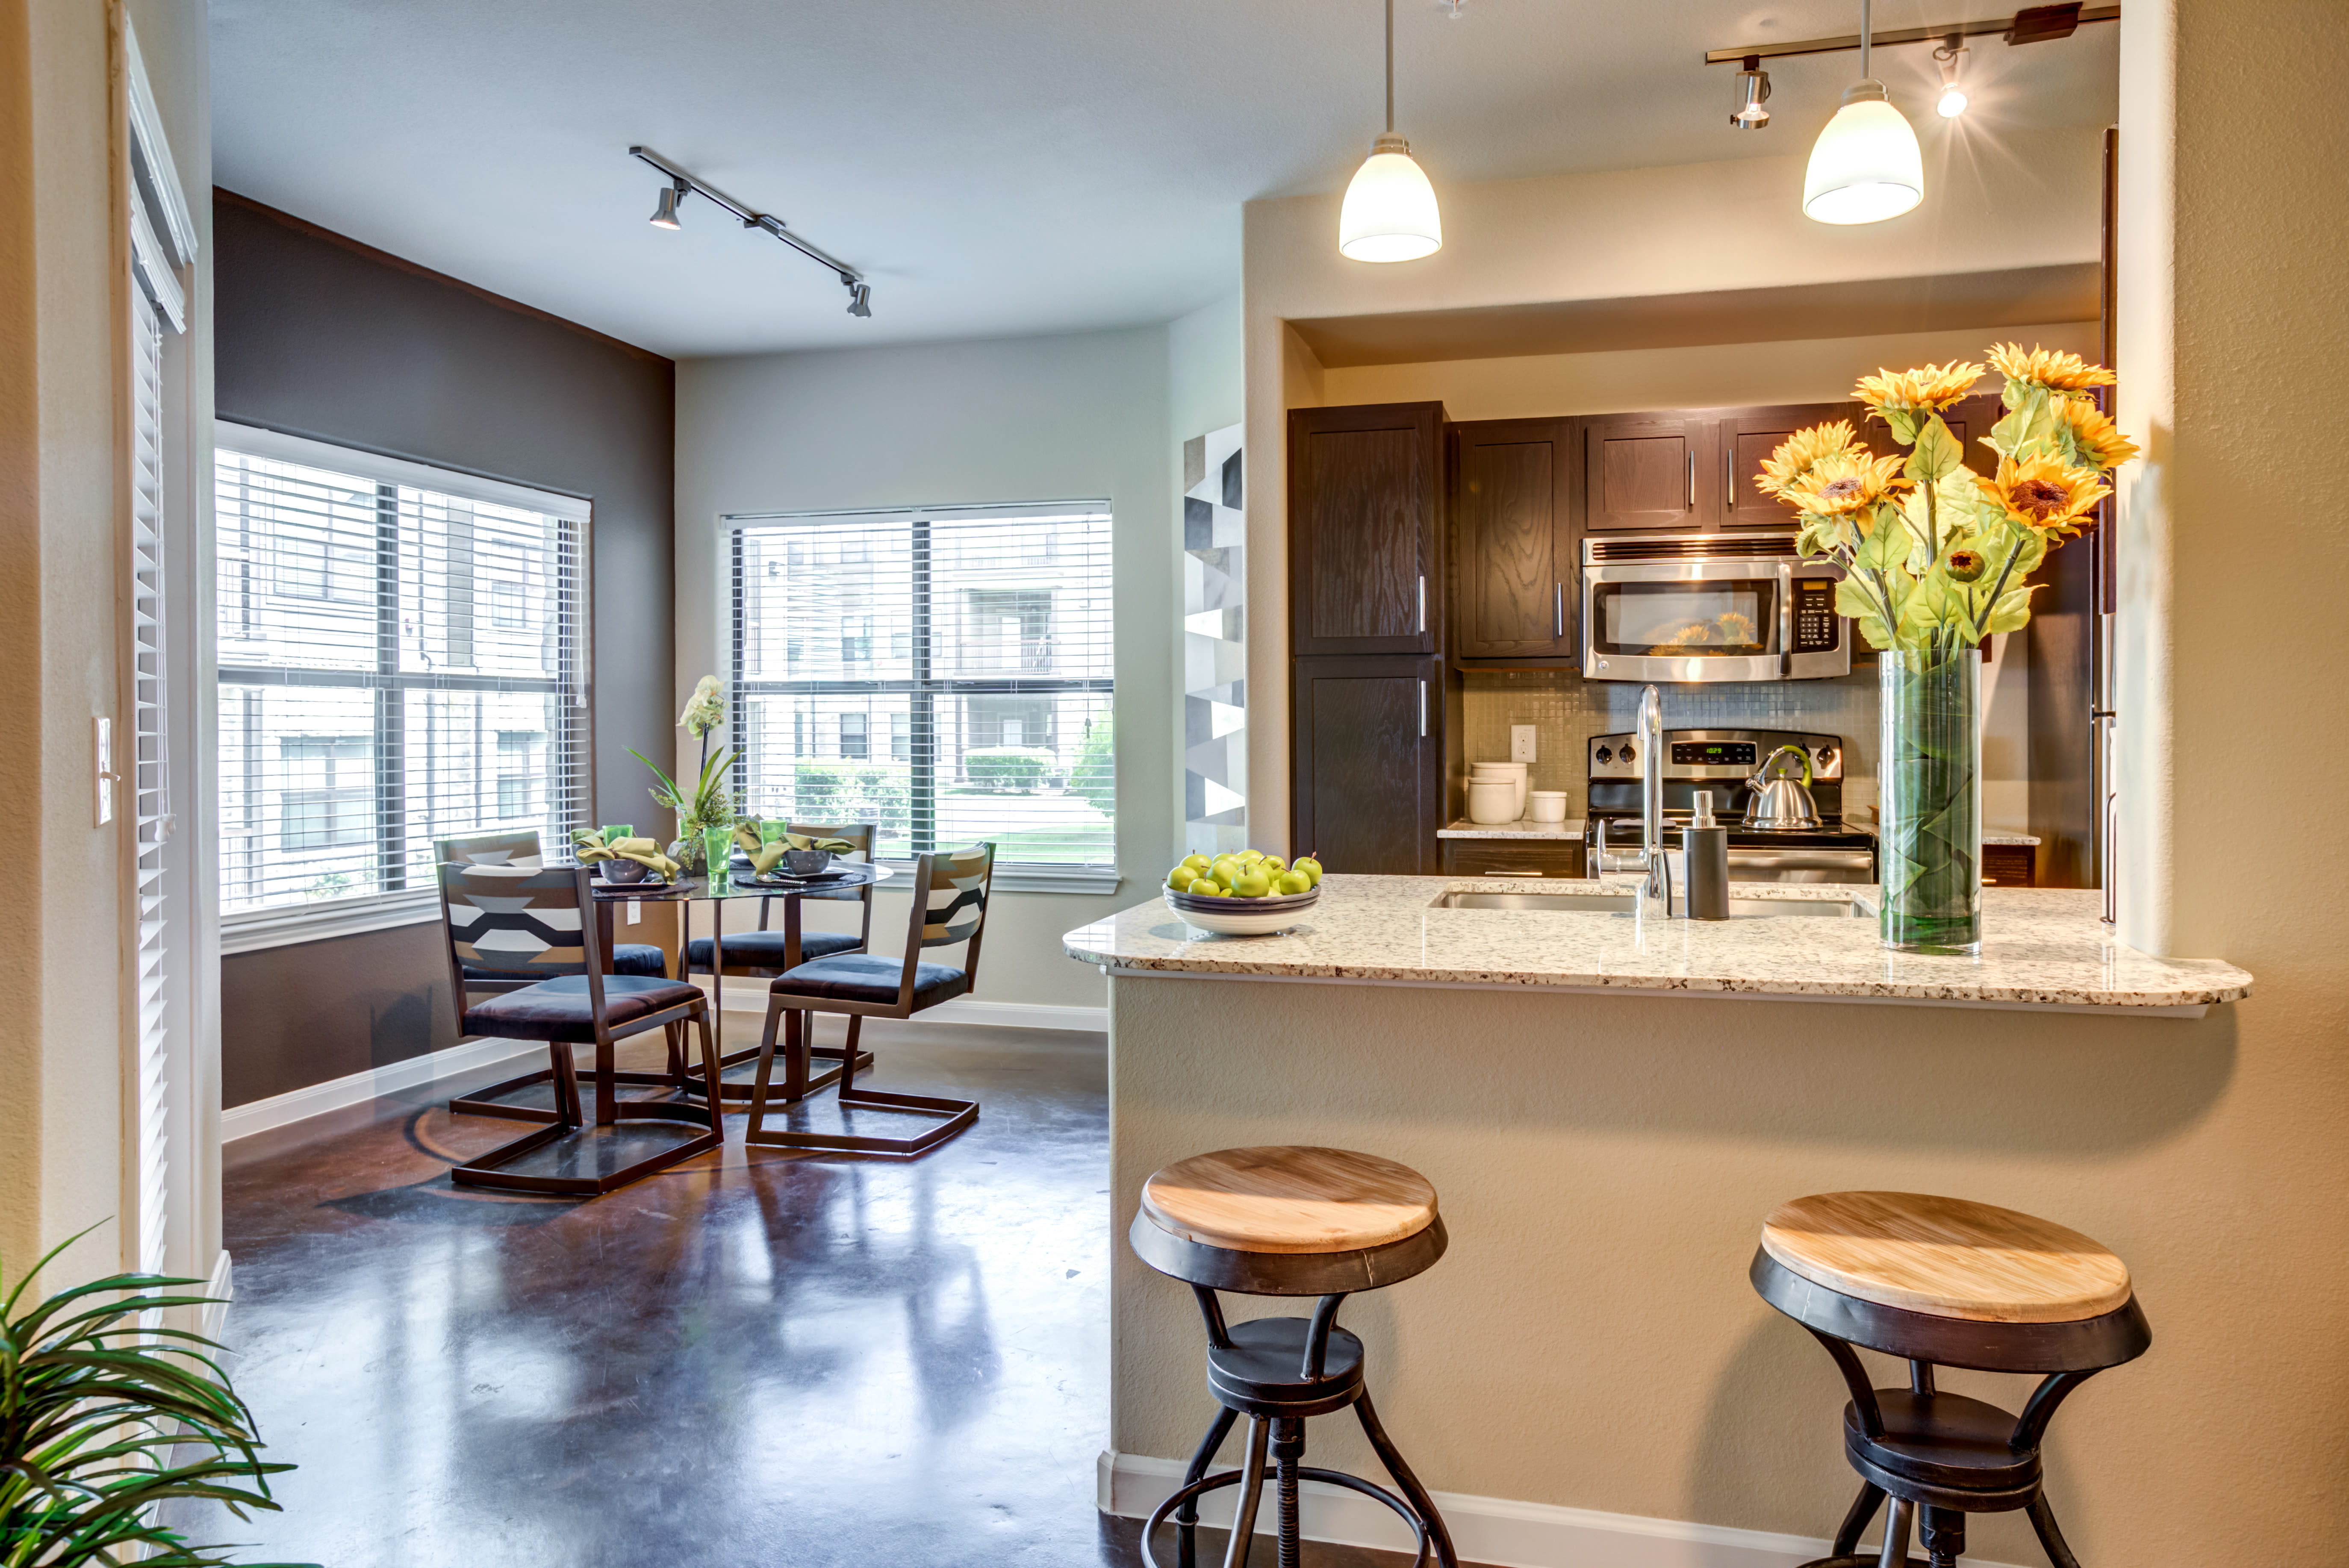 Dining room and Kitchen with barstools at Legacy Brooks in San Antonio, Texas